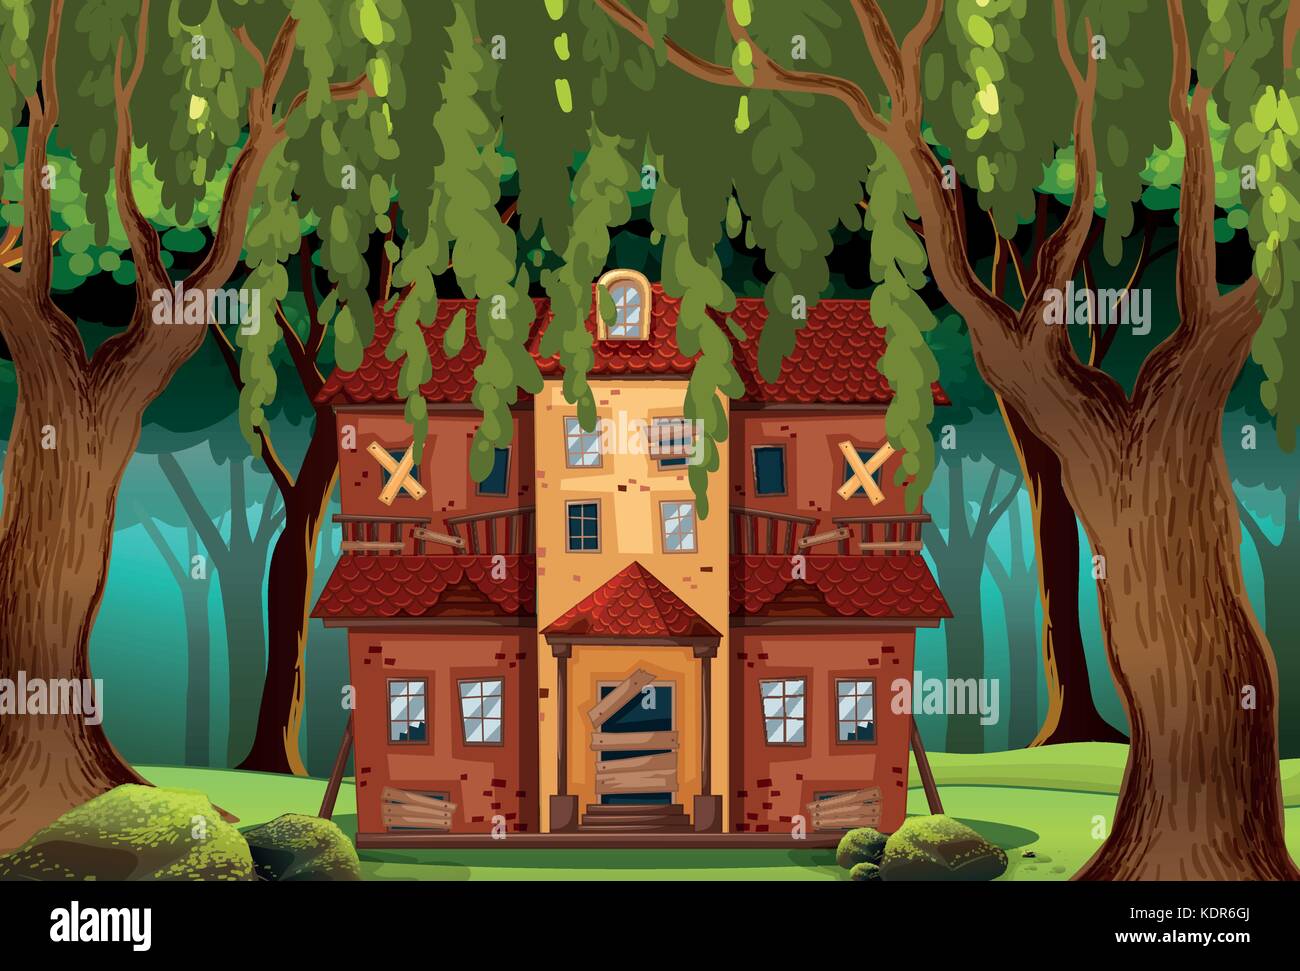 Outside haunted house Stock Vector Images - Alamy